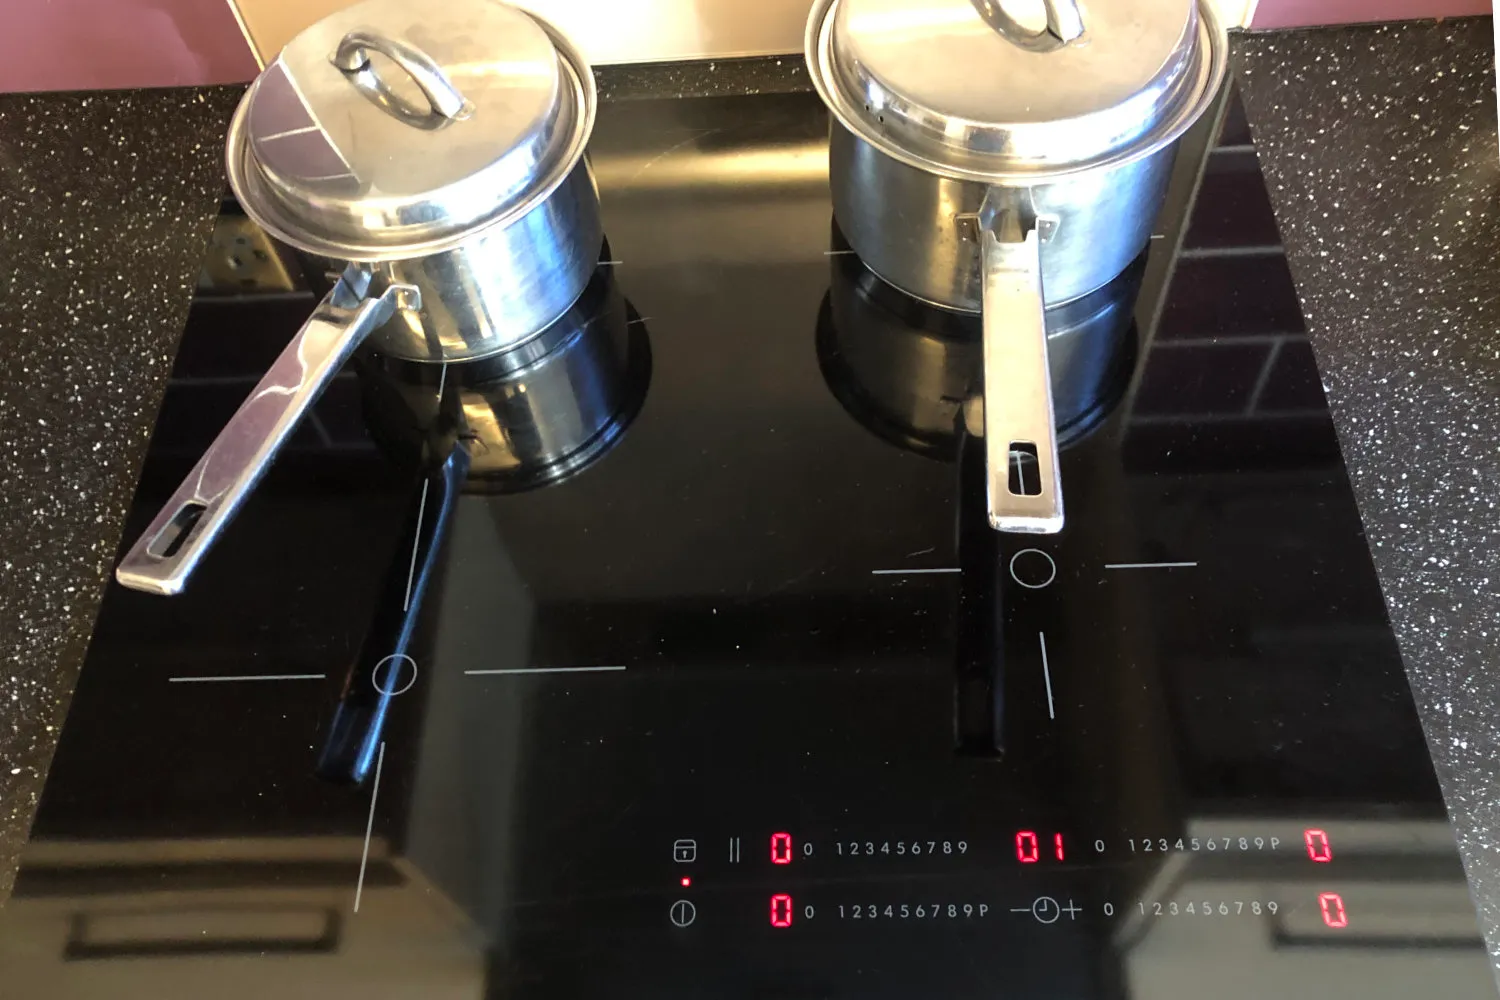 How To Clean and Care For an Induction Cooktop